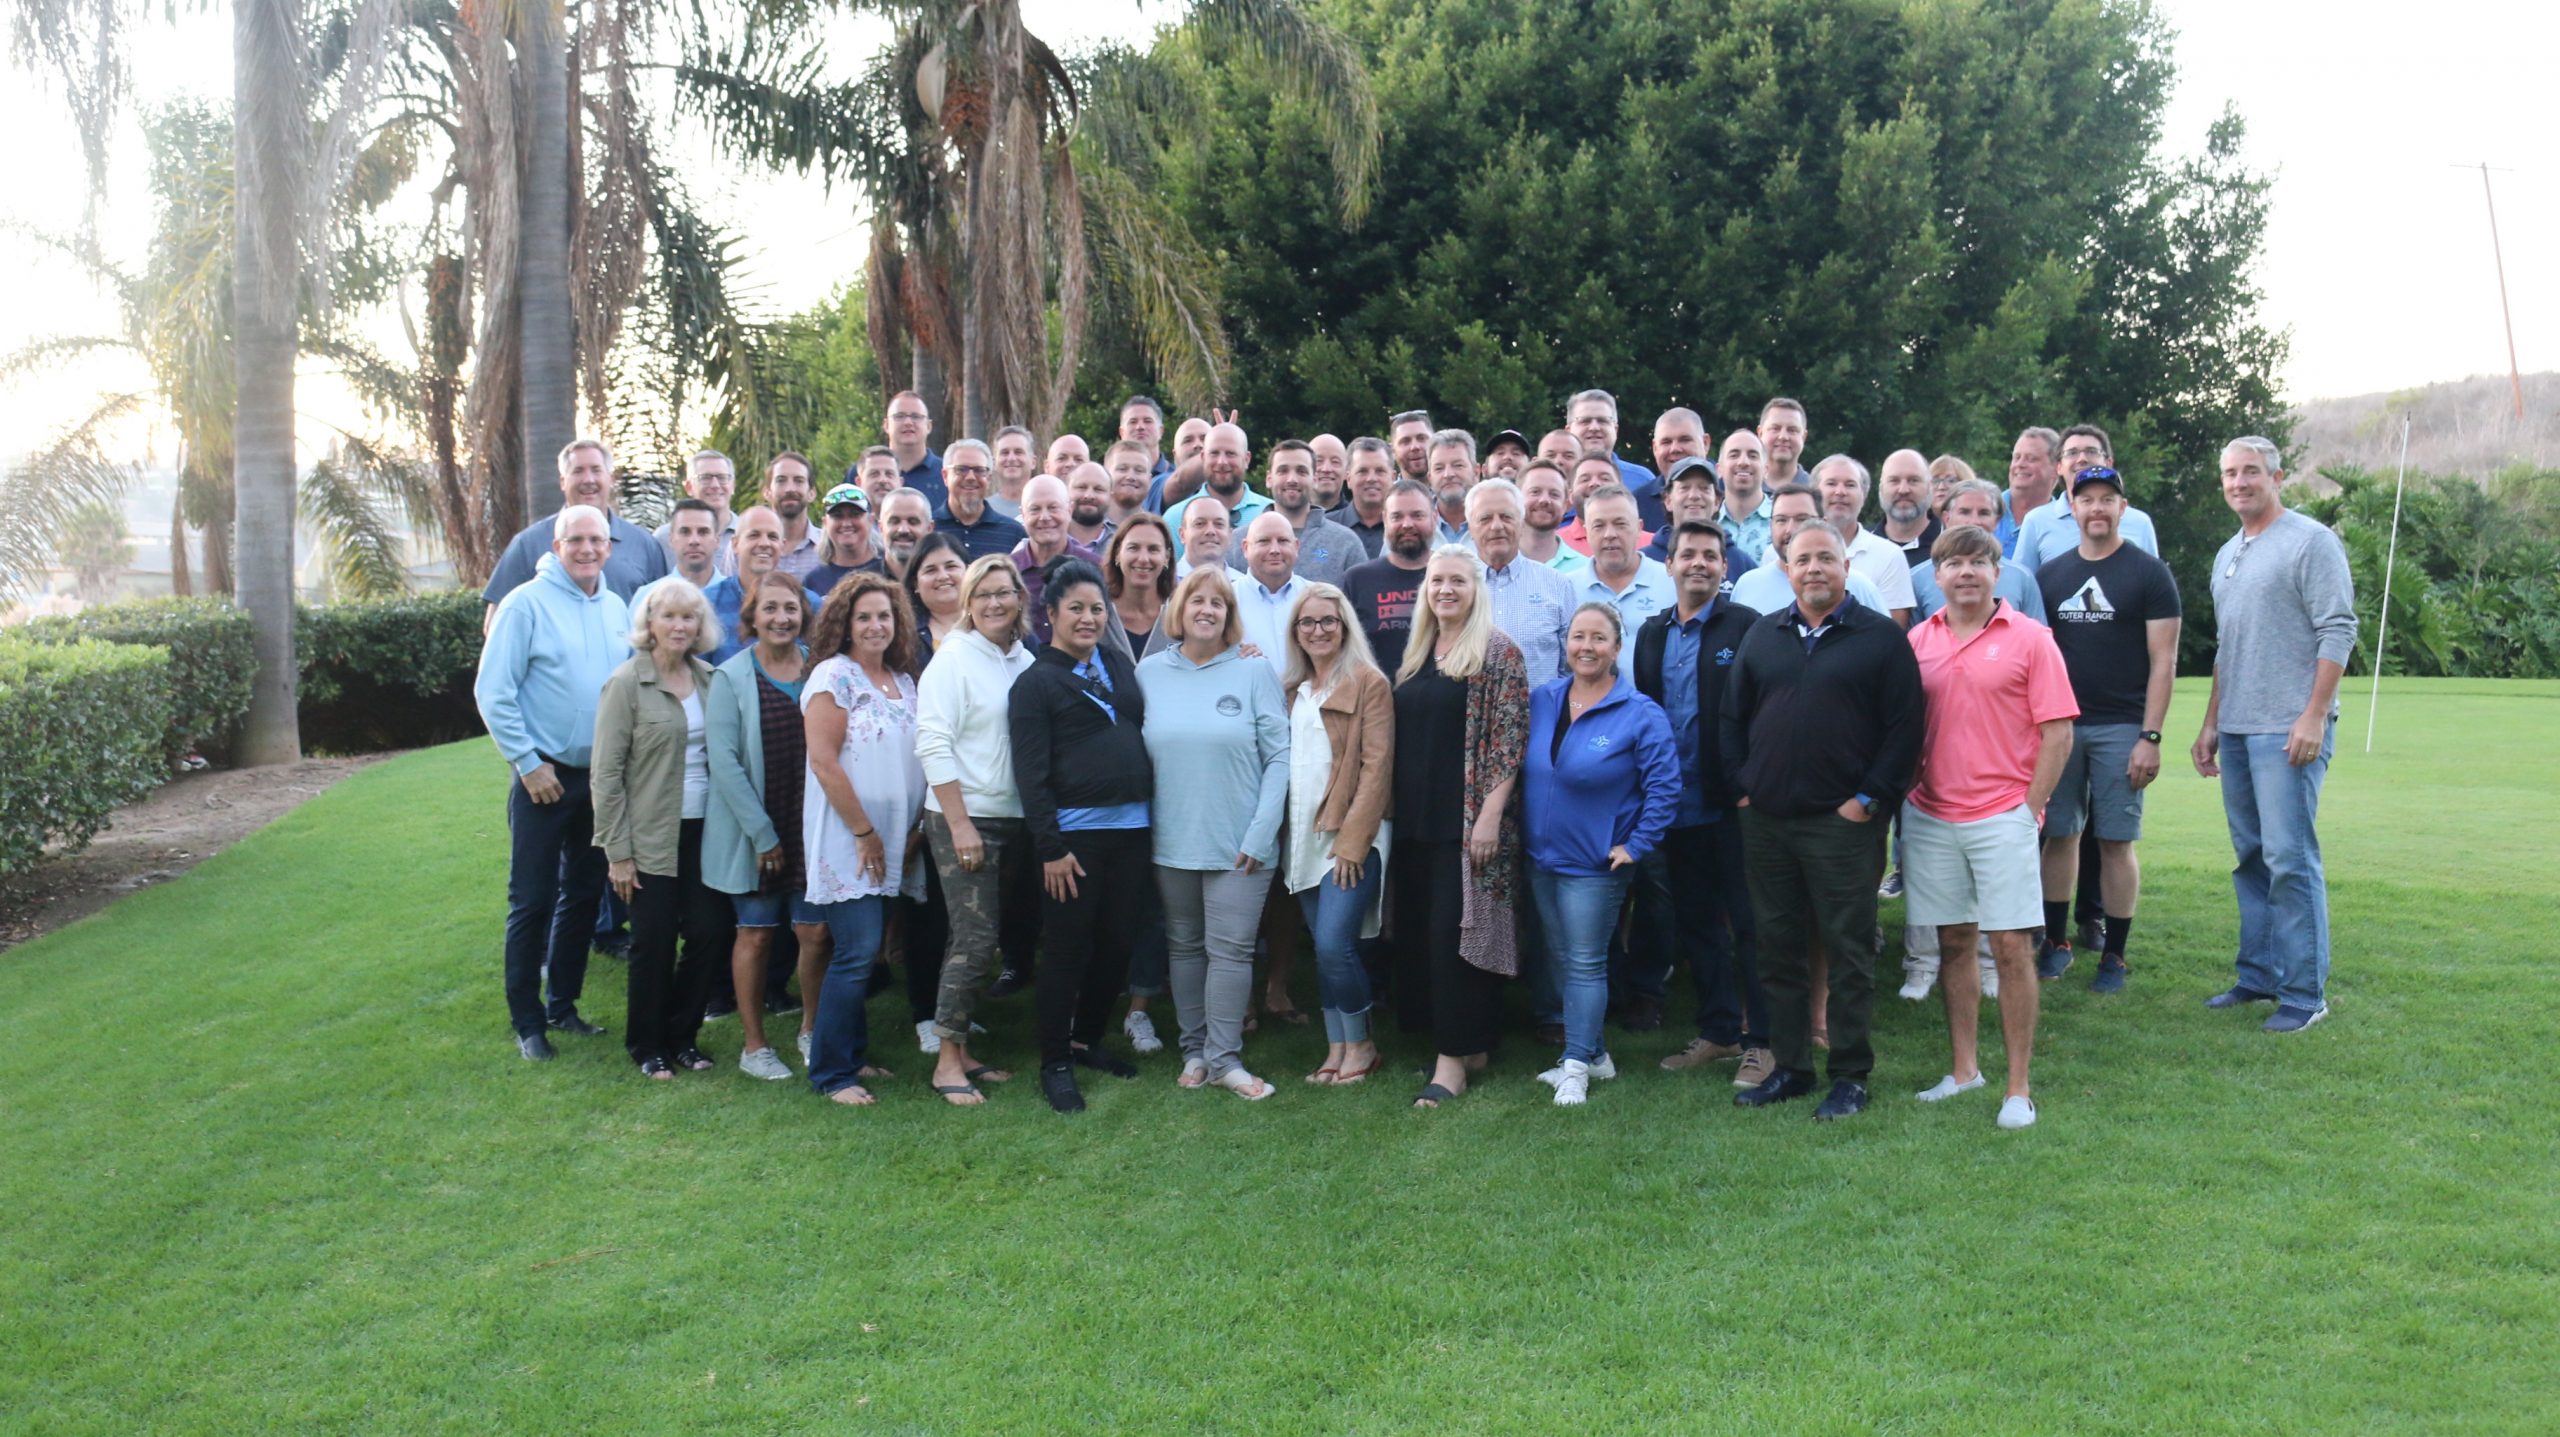 Allen Lund Company 2021 Managers Meeting was a Big Success!